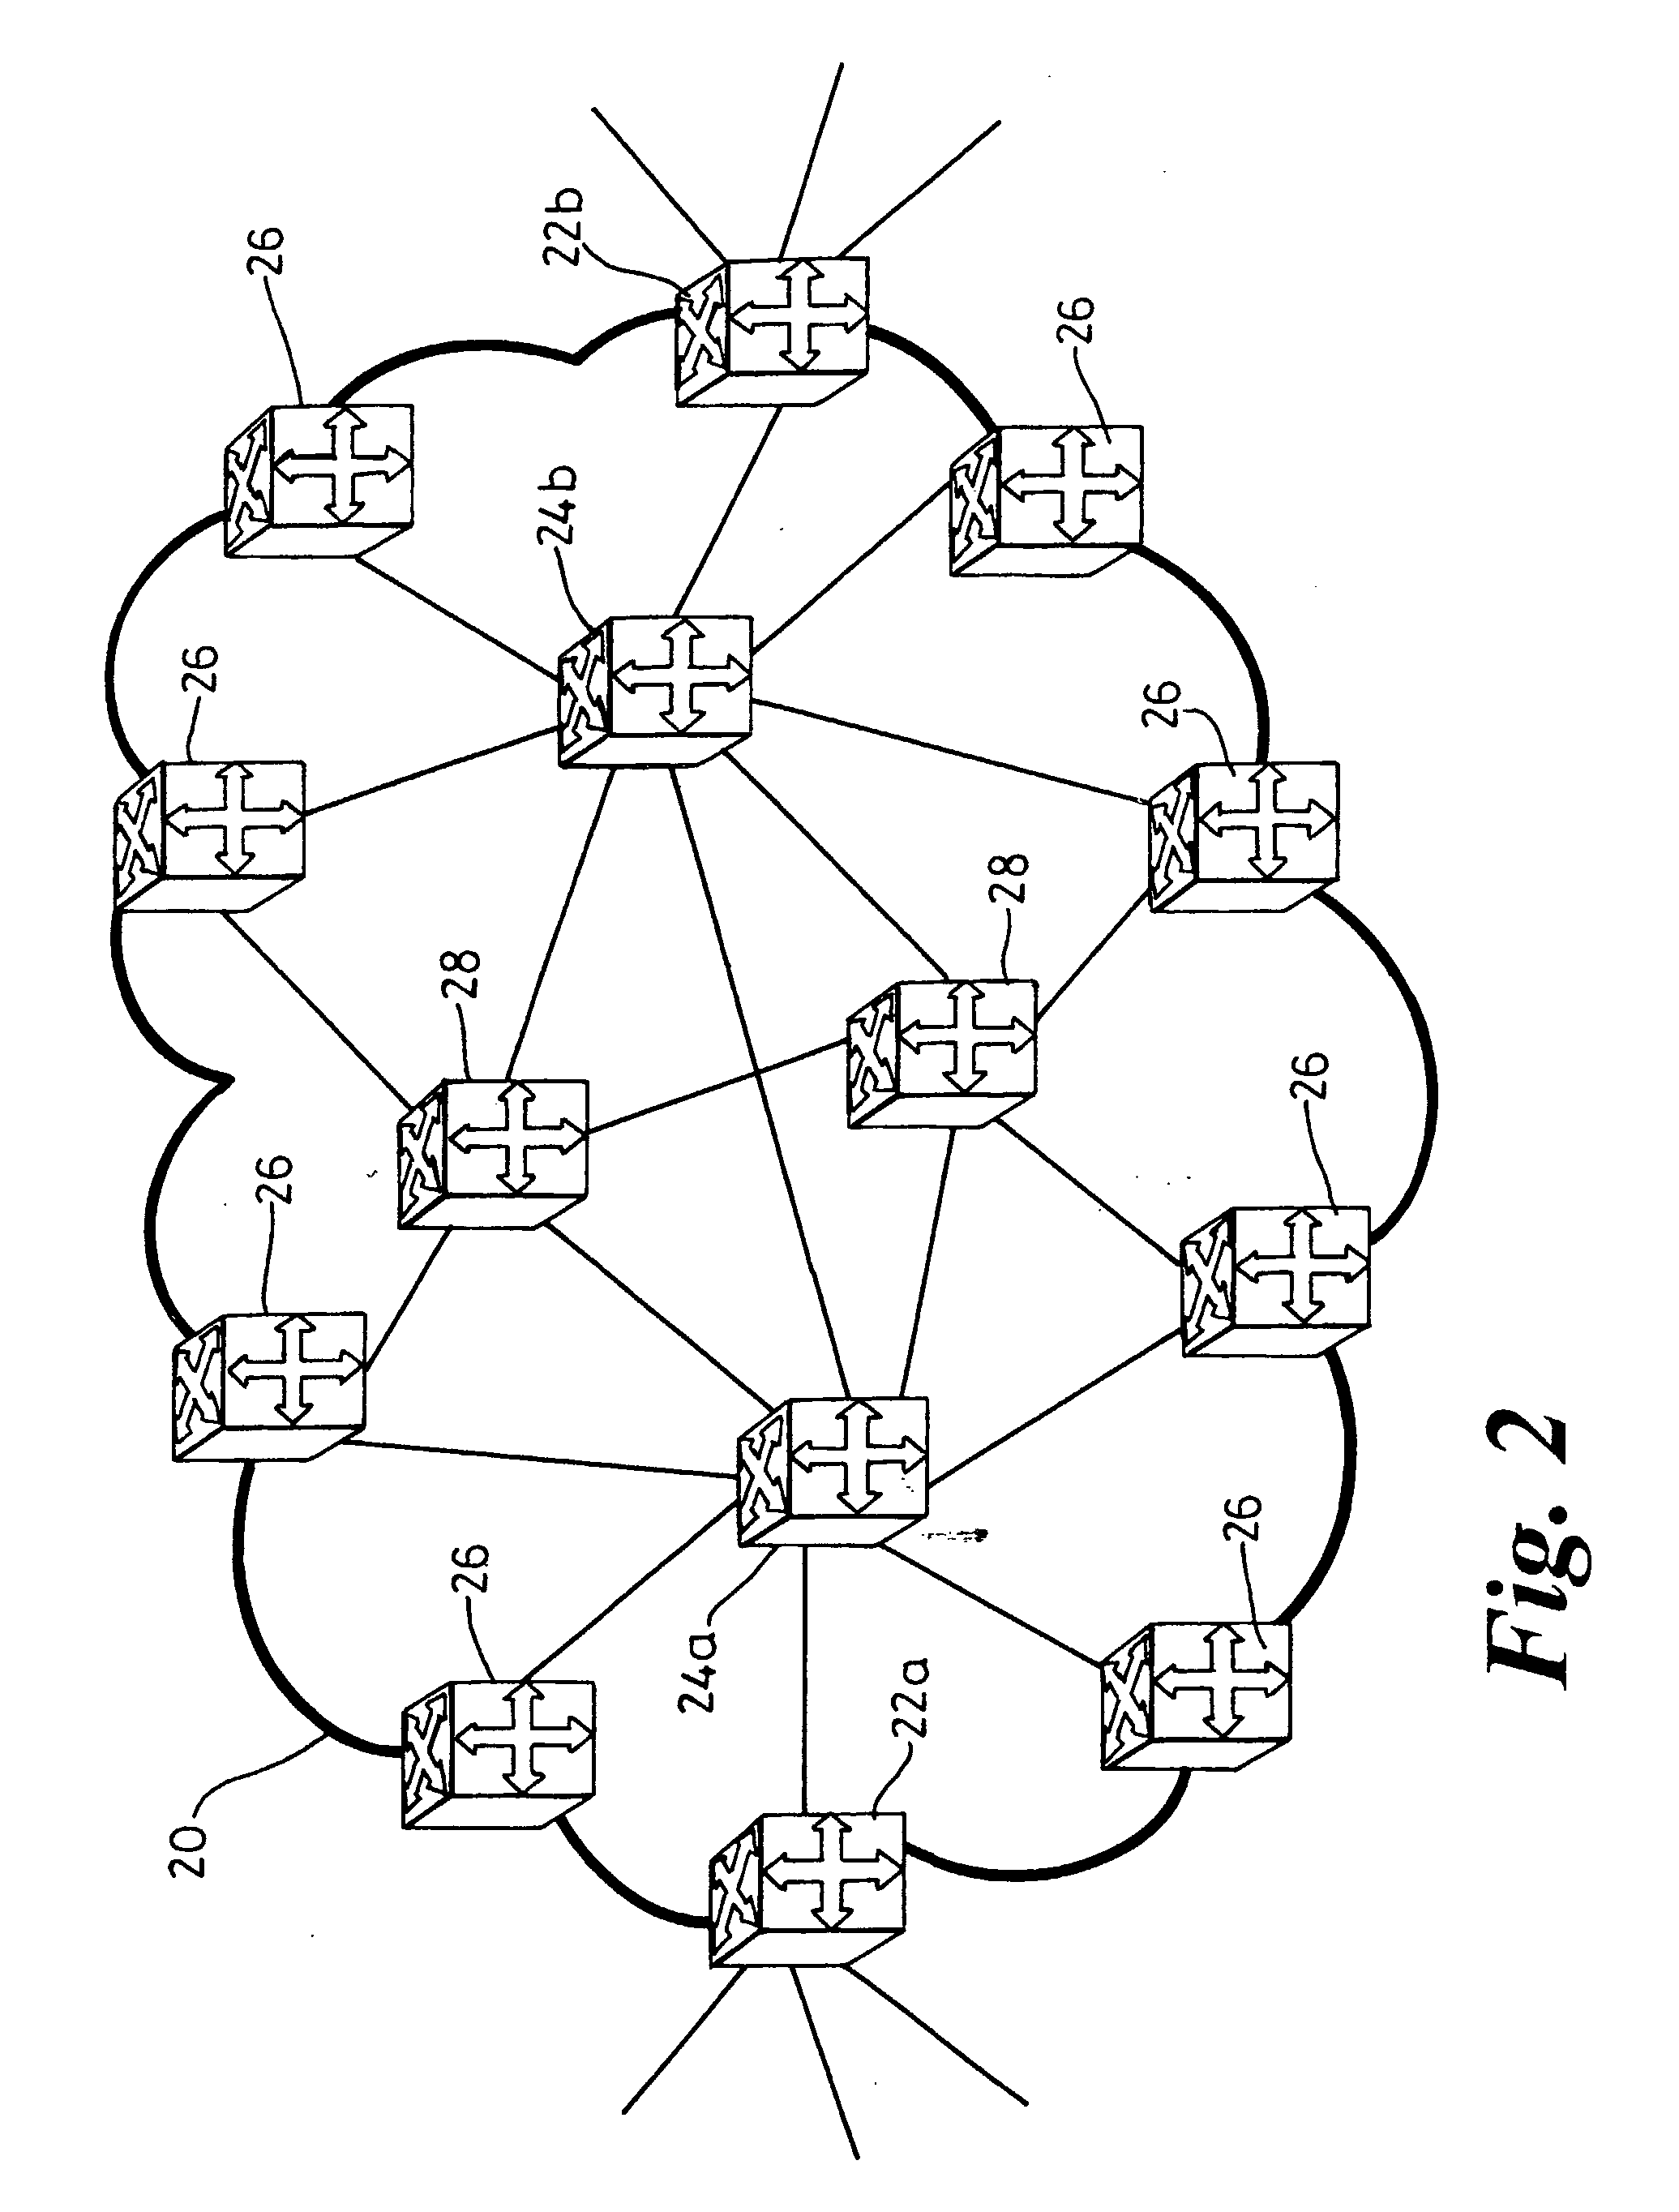 Differential Forwarding in Address-Based Carrier Networks